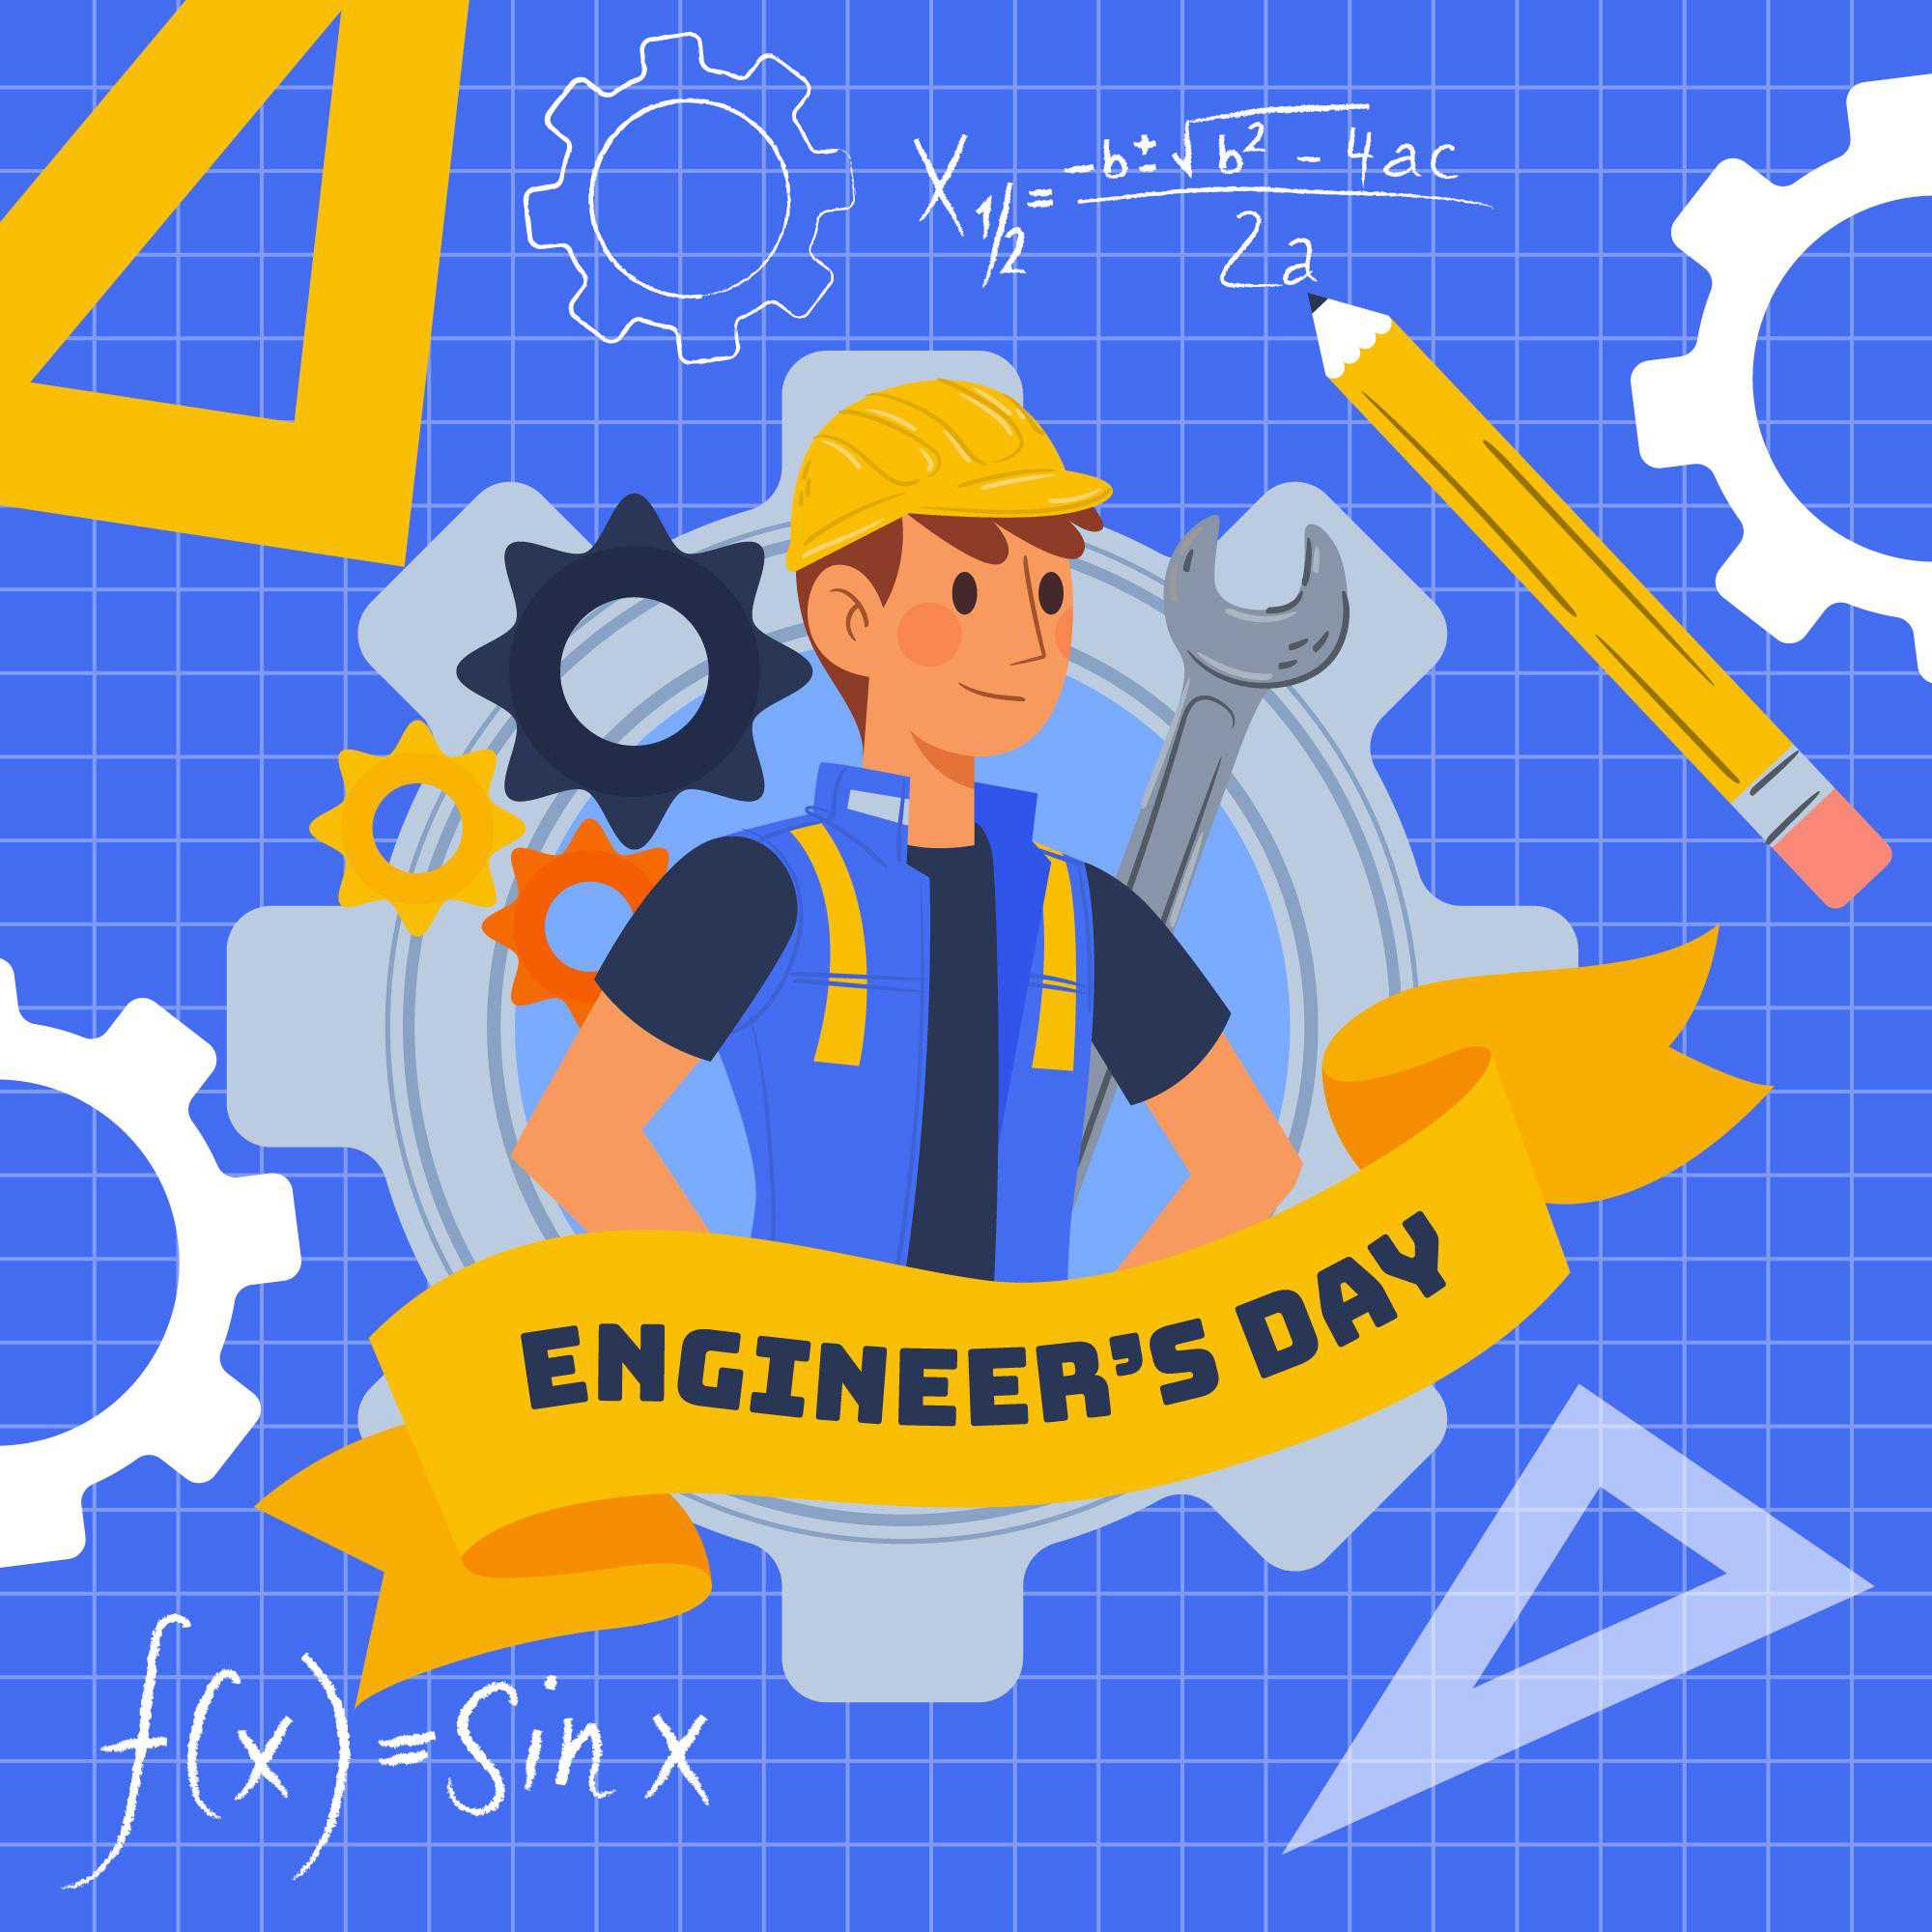 Happy Engineer's Day pictures